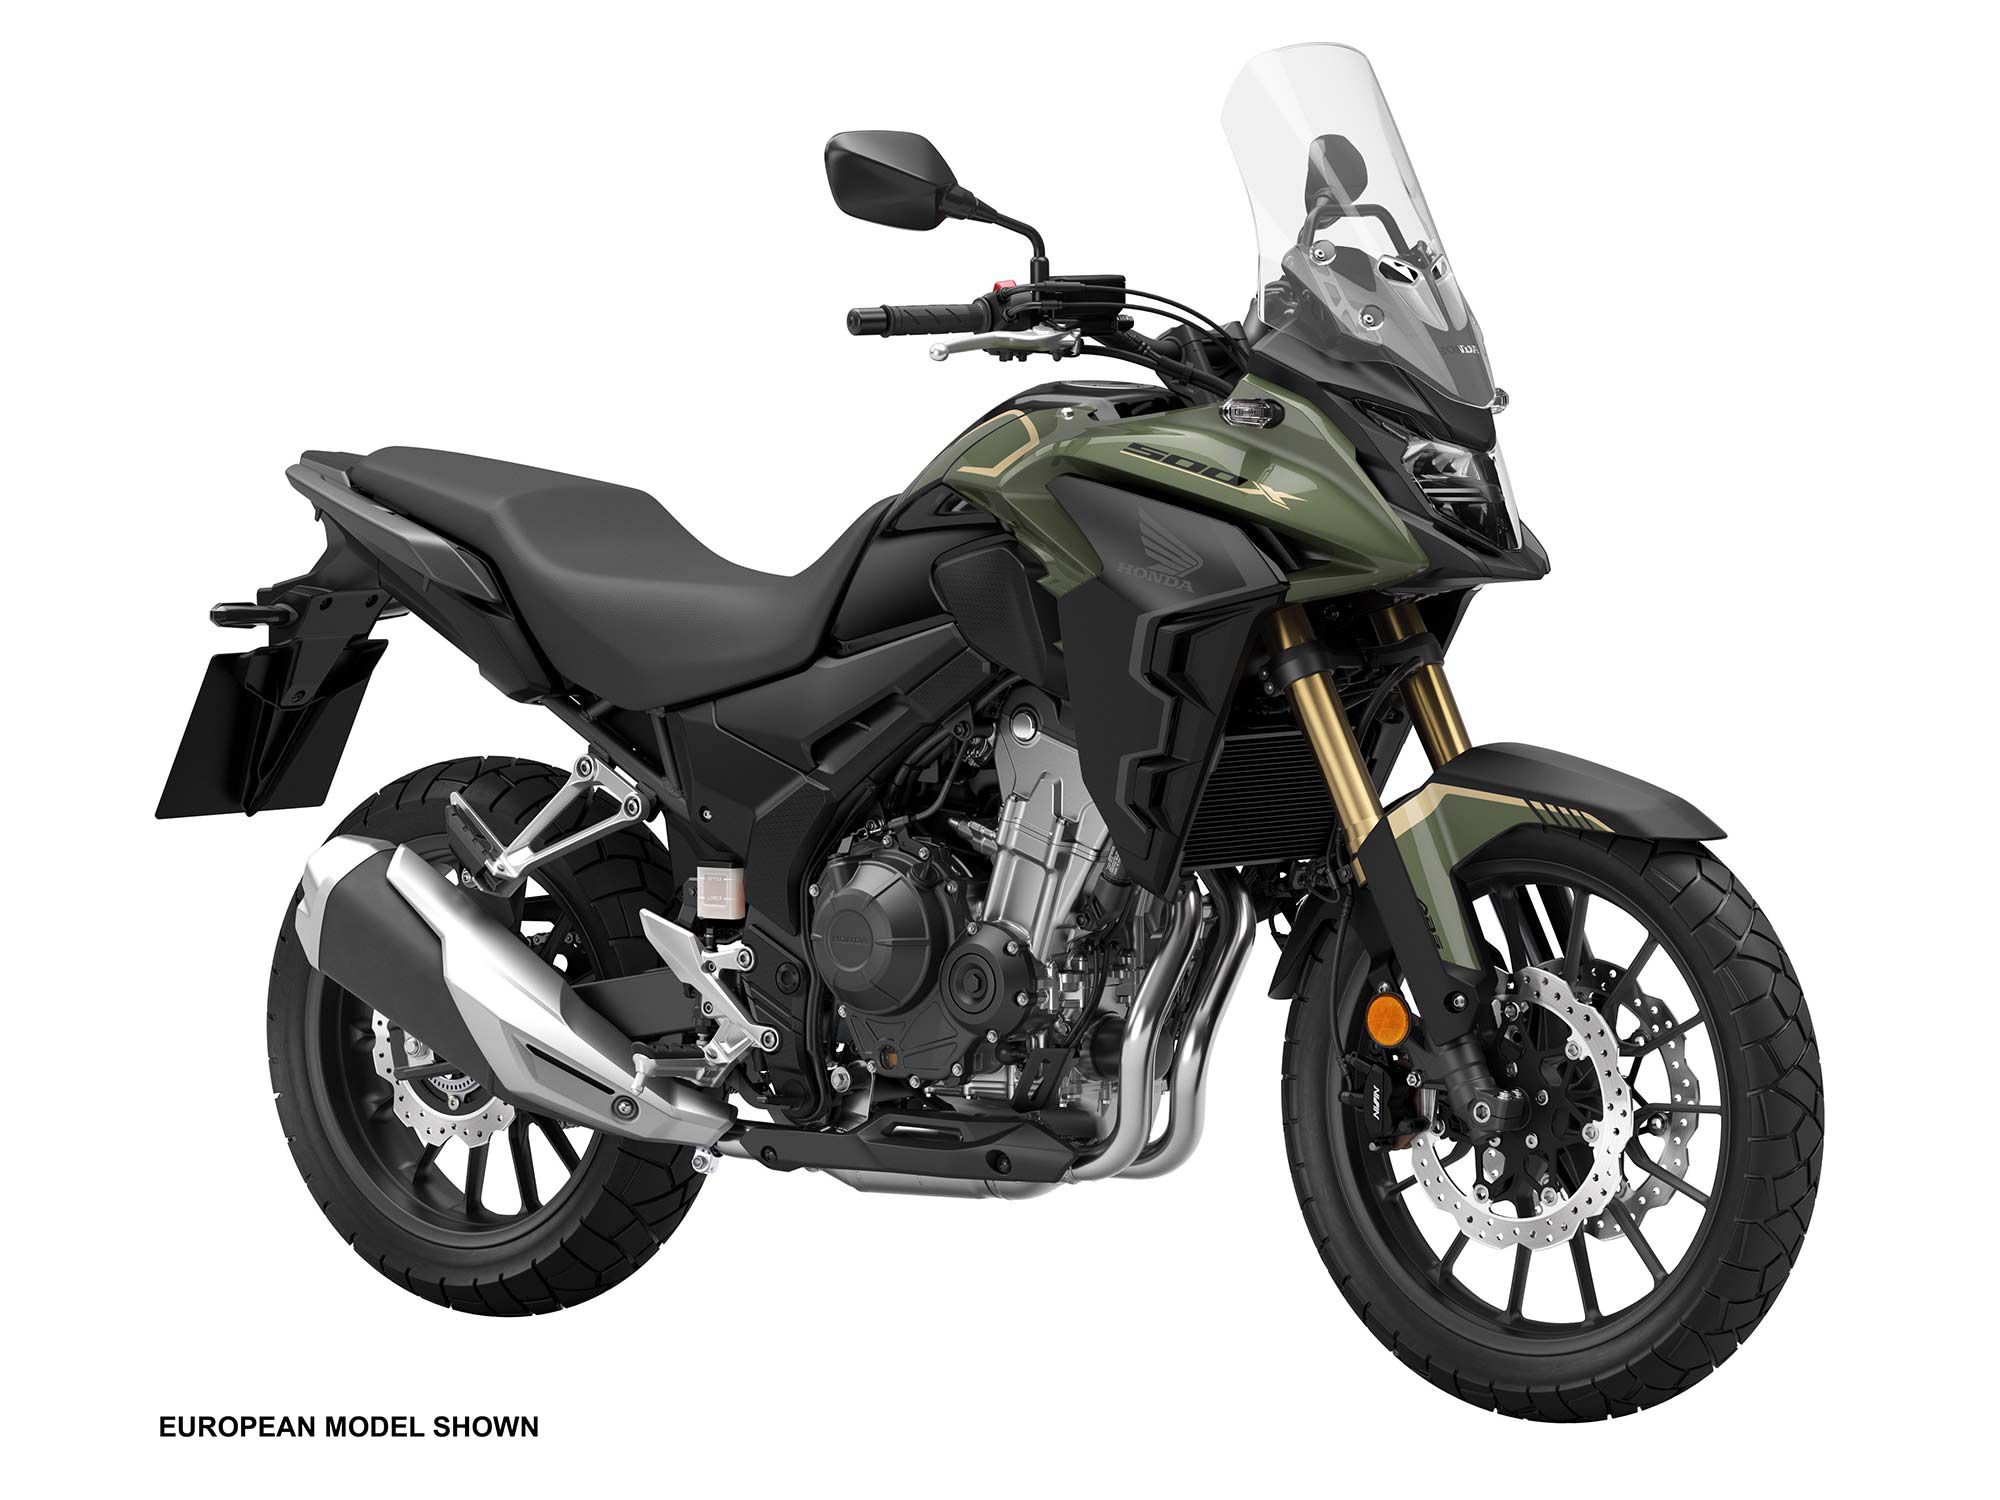 Consider the Honda CB500X a “light middleweight” adventurer that’s ready to serve as a city commuter on weekdays but then deliver actual off-road adventure on weekends.